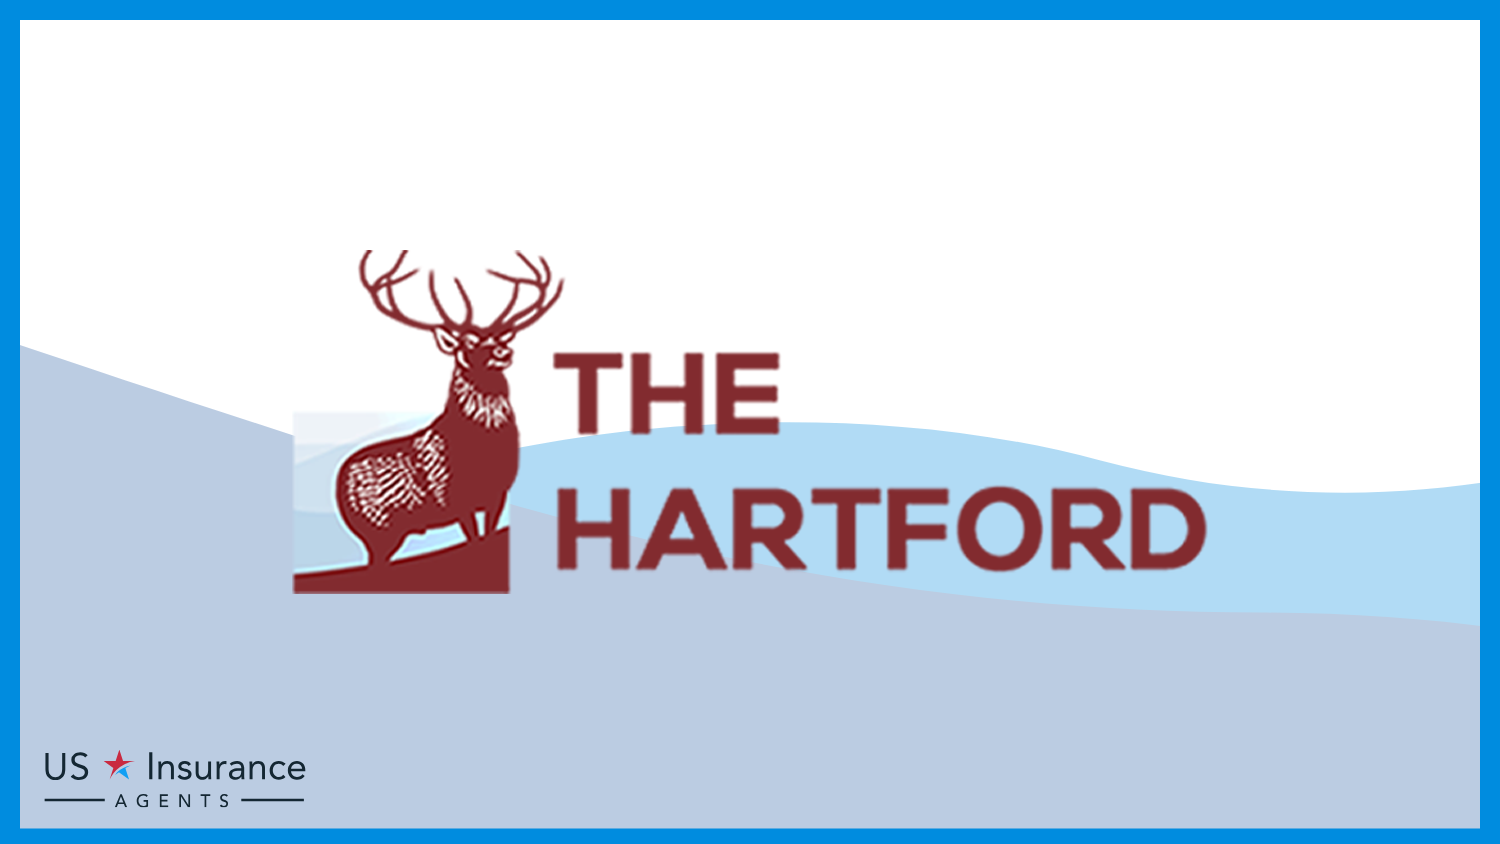 The Hartford : Best Business Insurance for Event Planners